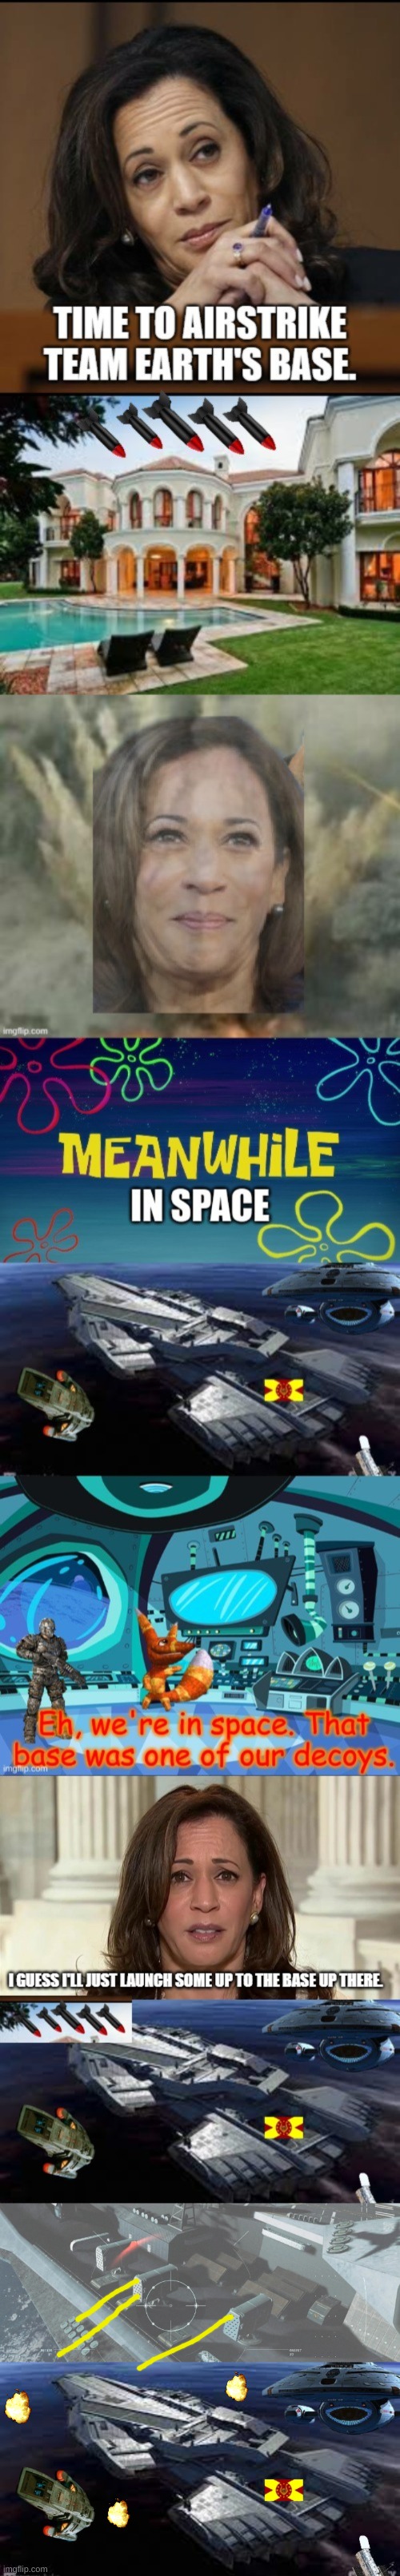 2 per boom, you lose | image tagged in team earth space hq | made w/ Imgflip meme maker